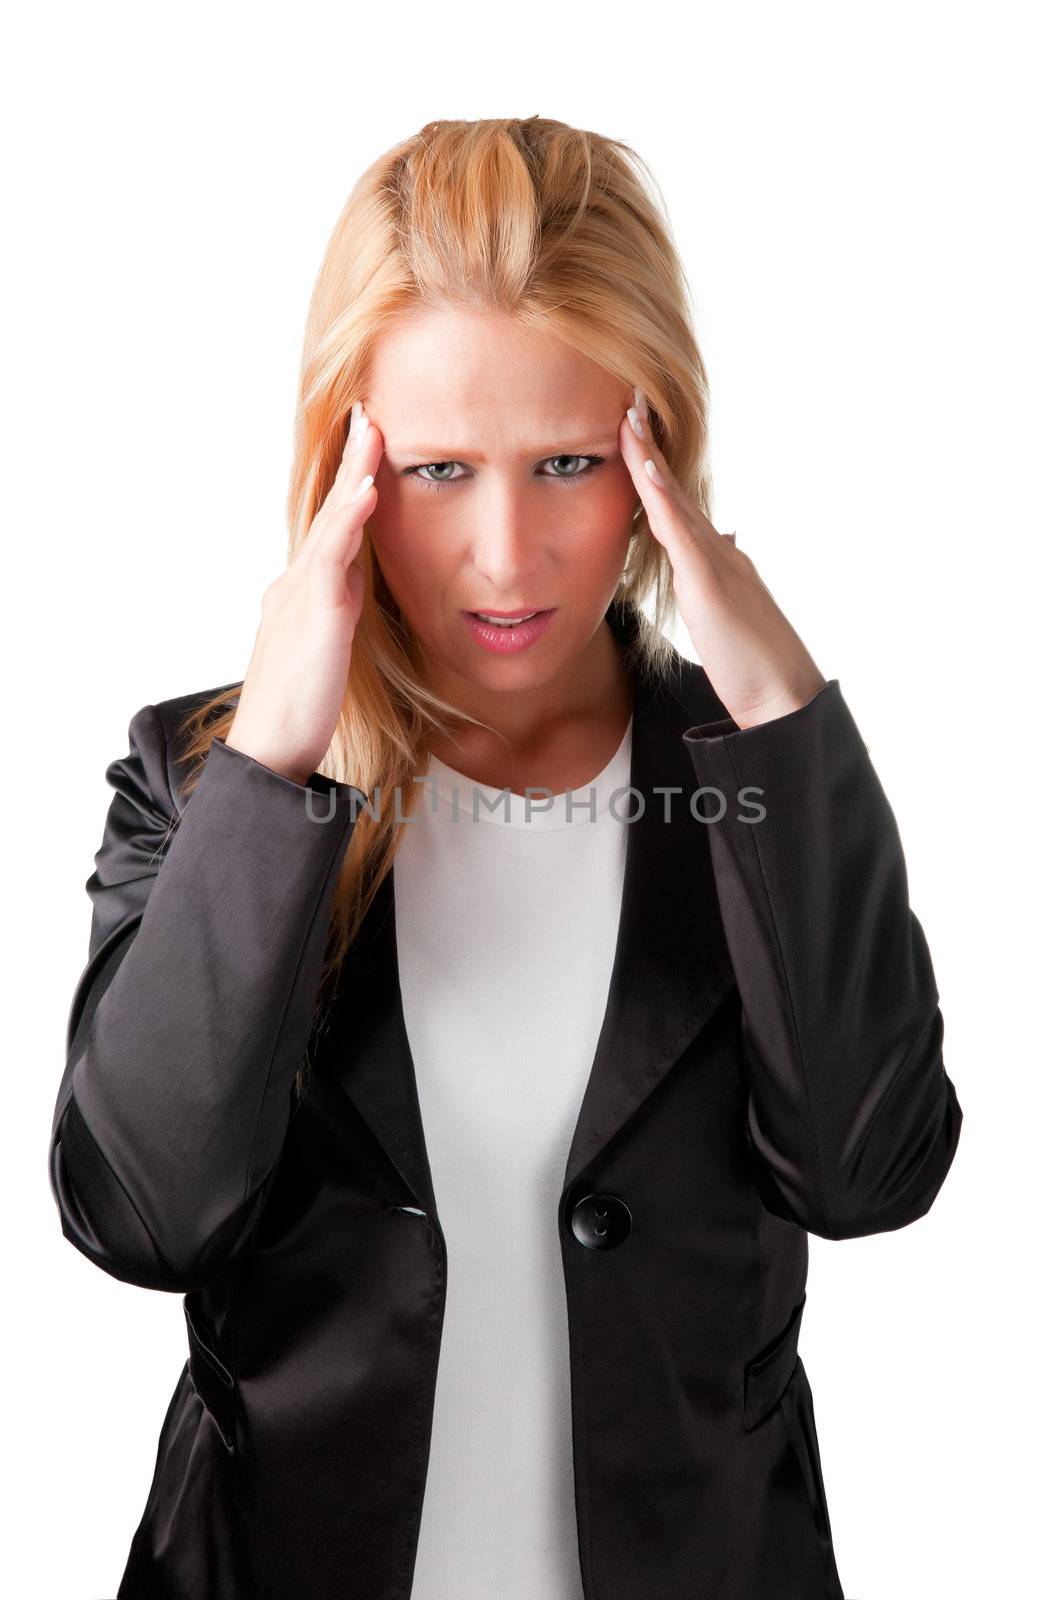 Woman suffering from an headache, holding her hands to the head